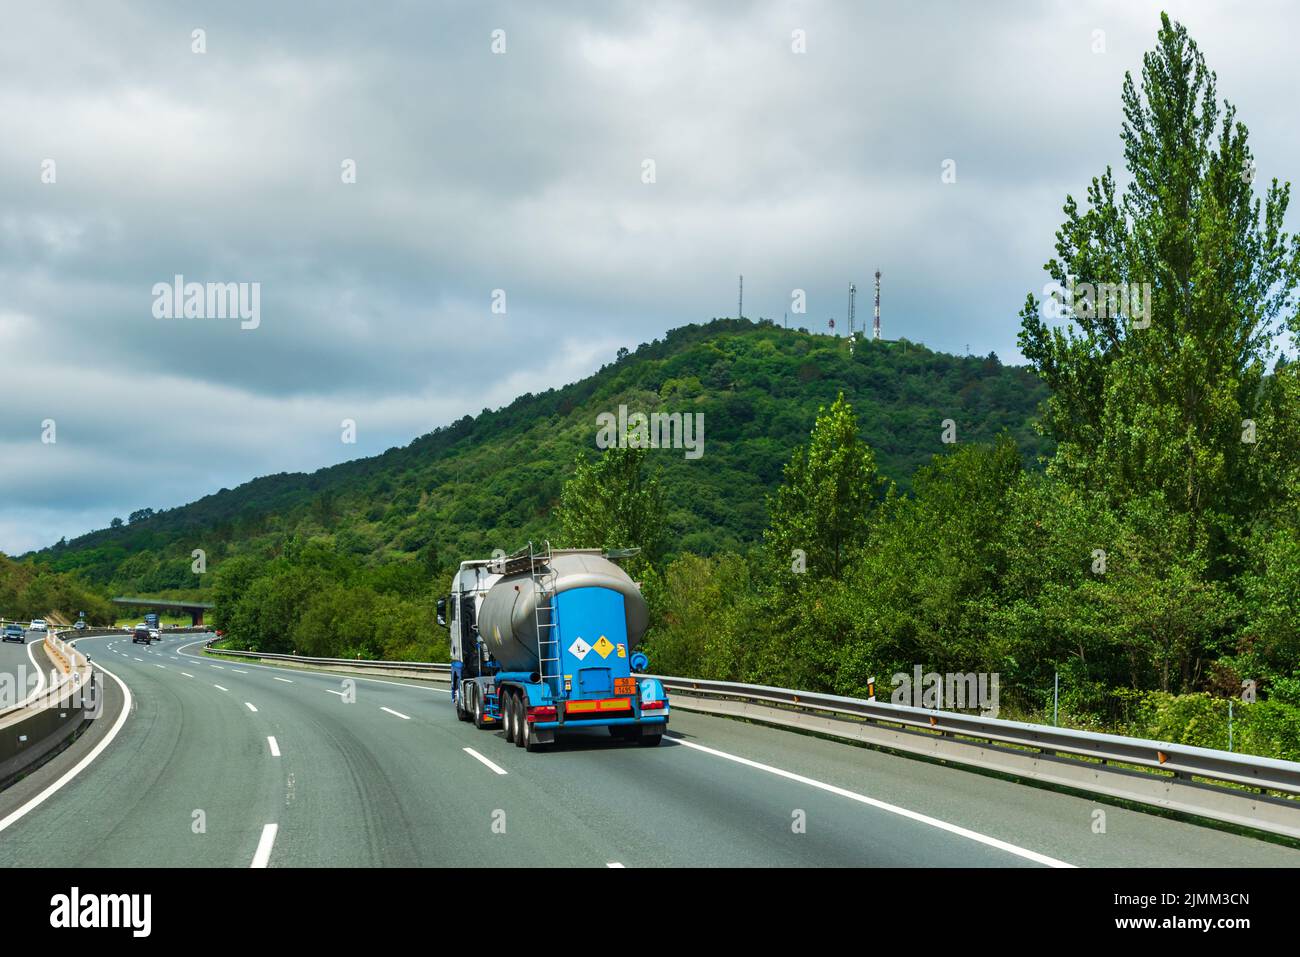 Powder tanker truck loaded with dangerous goods, danger due to combustion and polluting the environment, Stock Photo